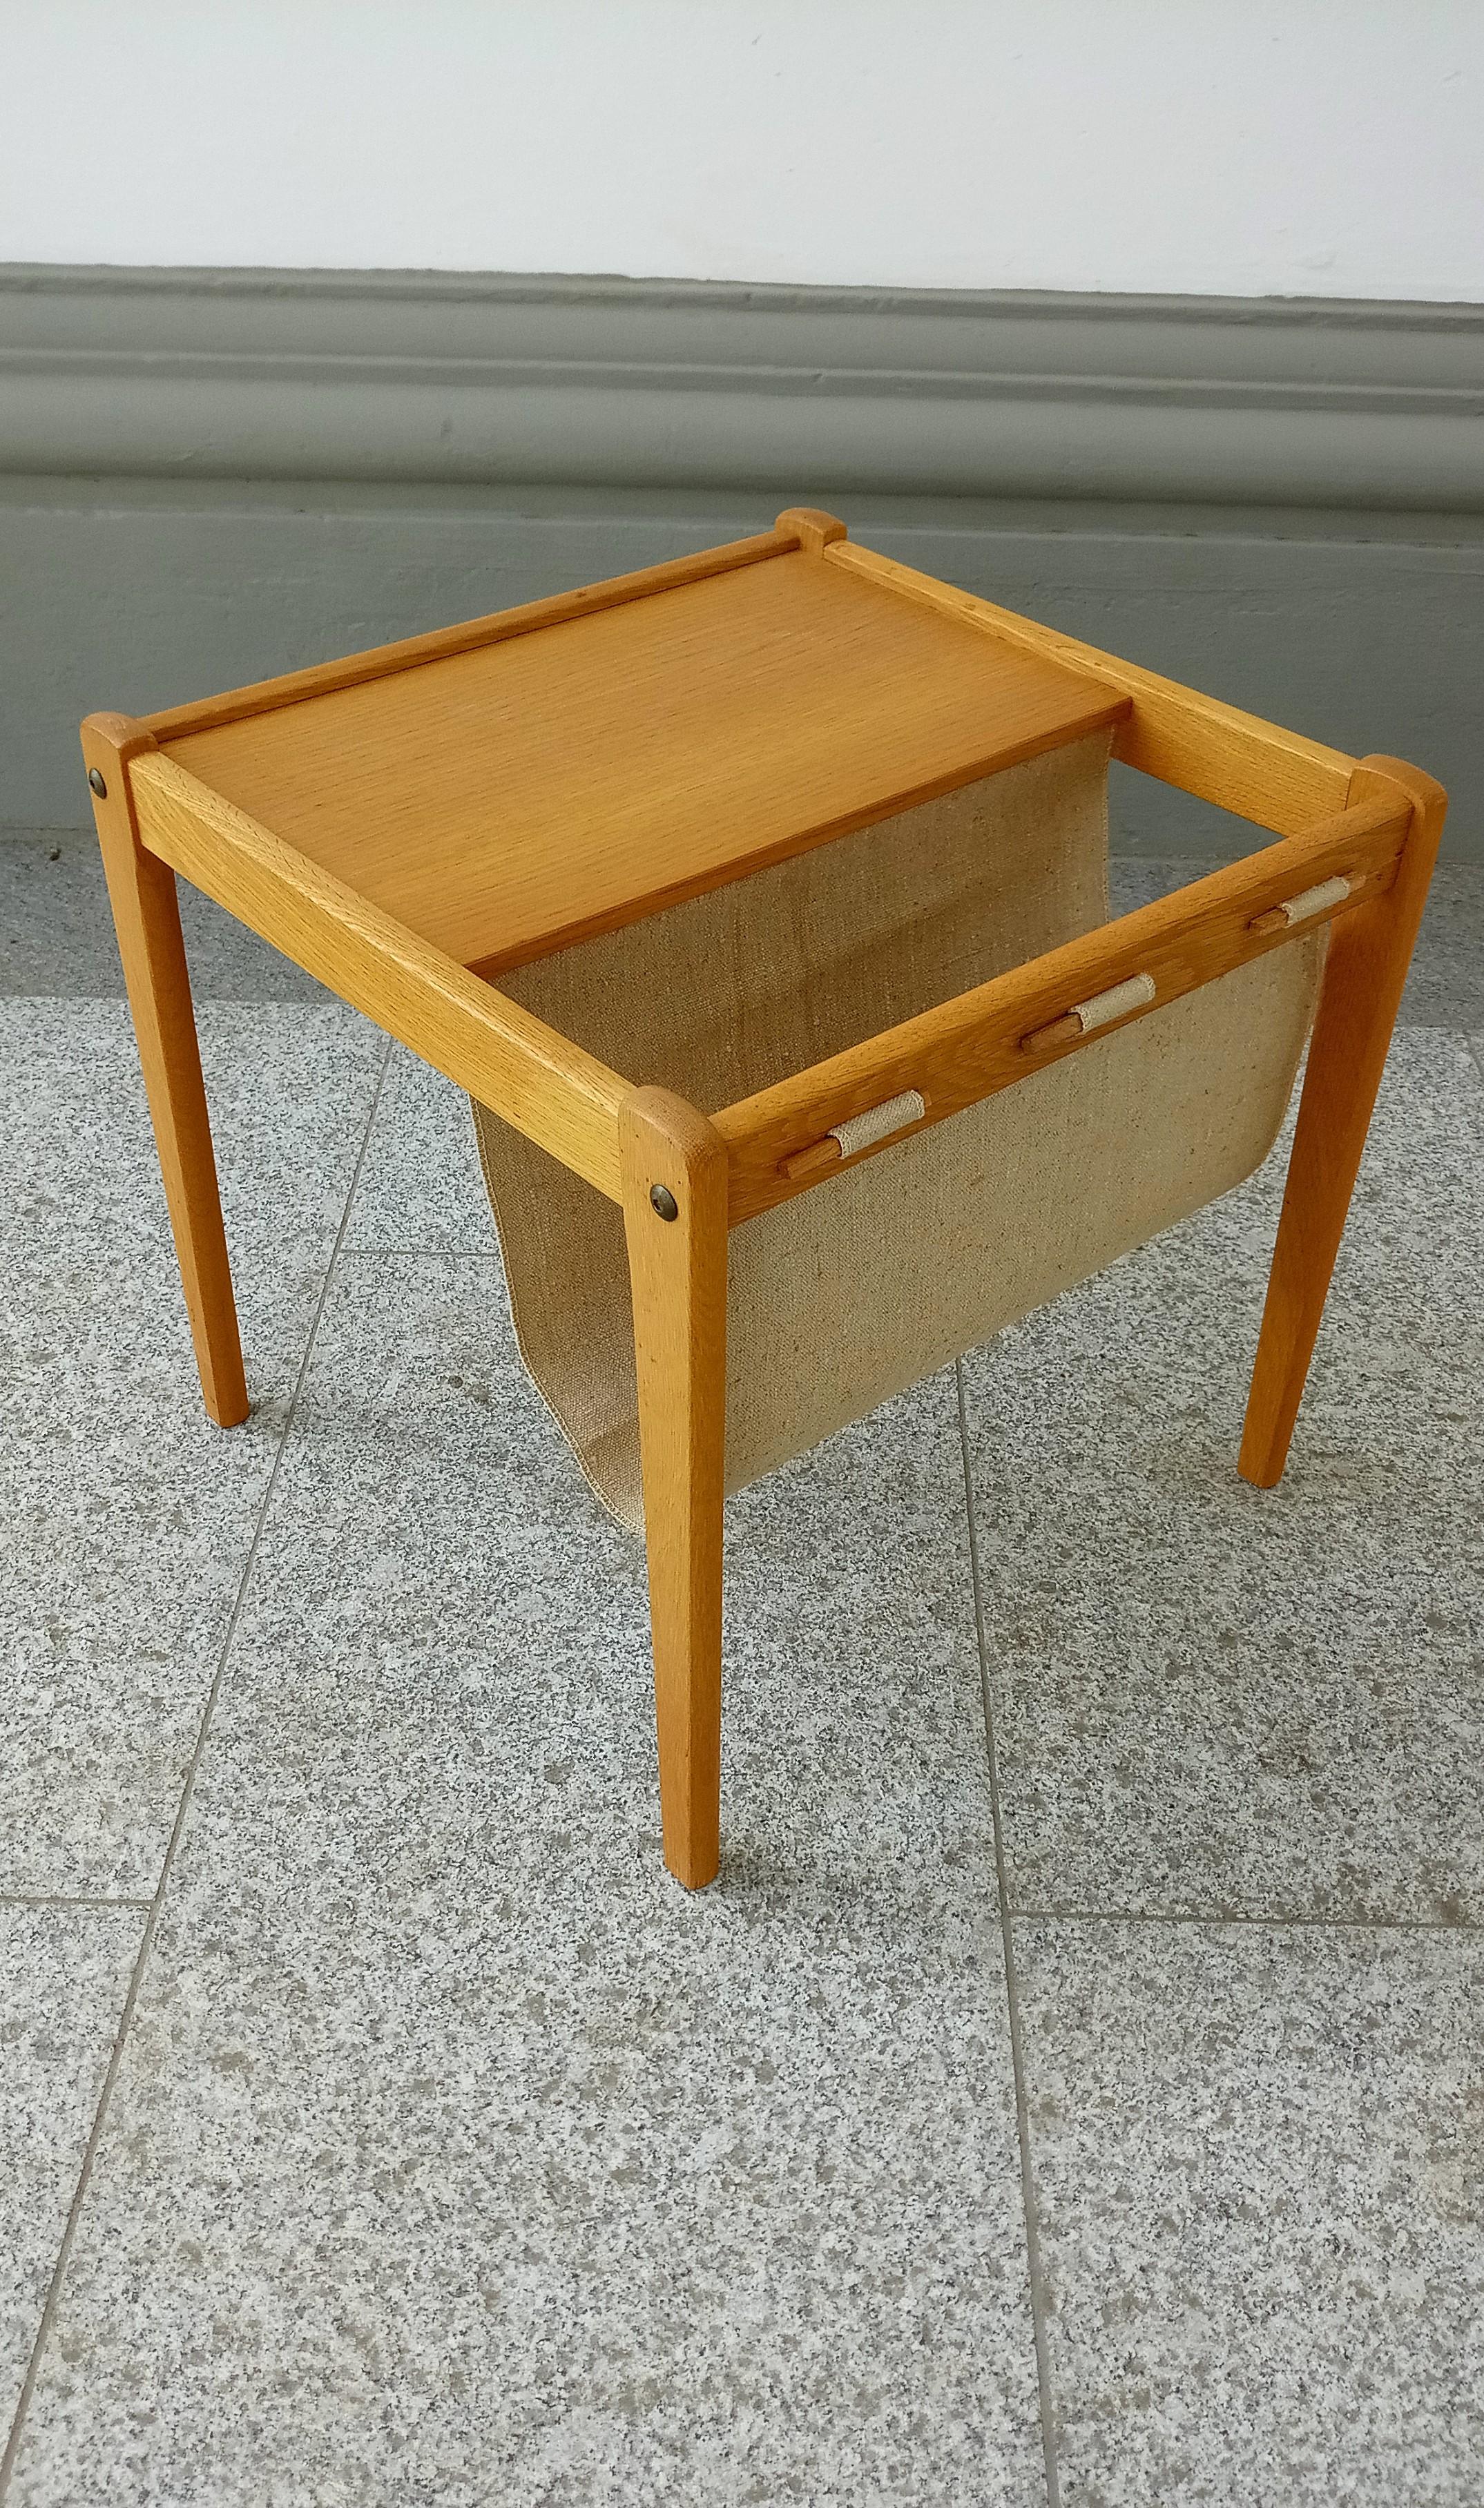 Decorative and practical sidetable in birch and canvas from BRDR Furbo.
The furniture is in a good used condition. One small spot in the canvas.
